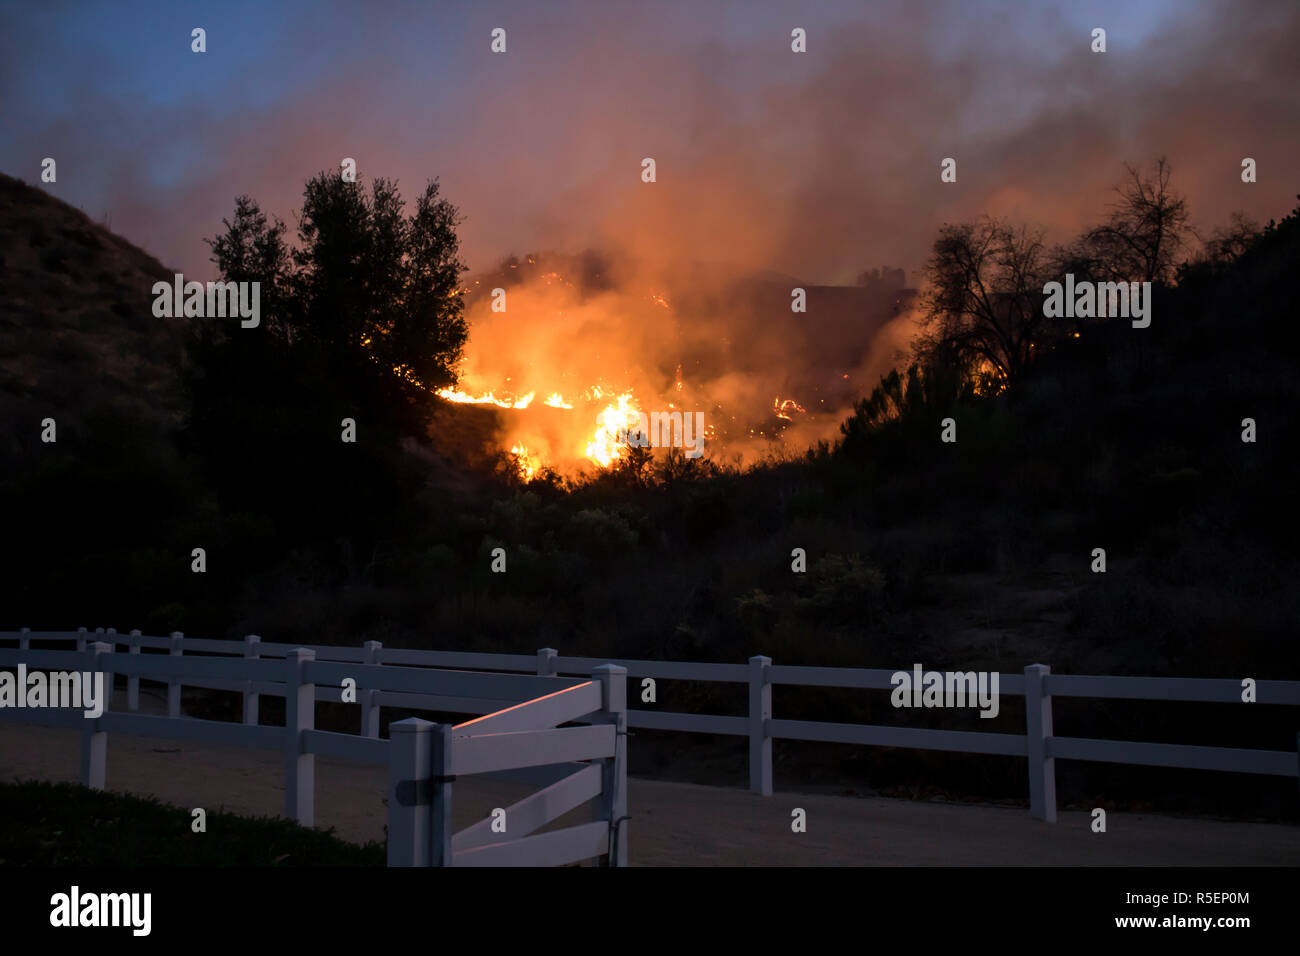 Wildfire flames burn hillside brush at night with dramatic shapes and color in California's Woolsey Fire.  Taken from suburban park with fence in fore. Stock Photo